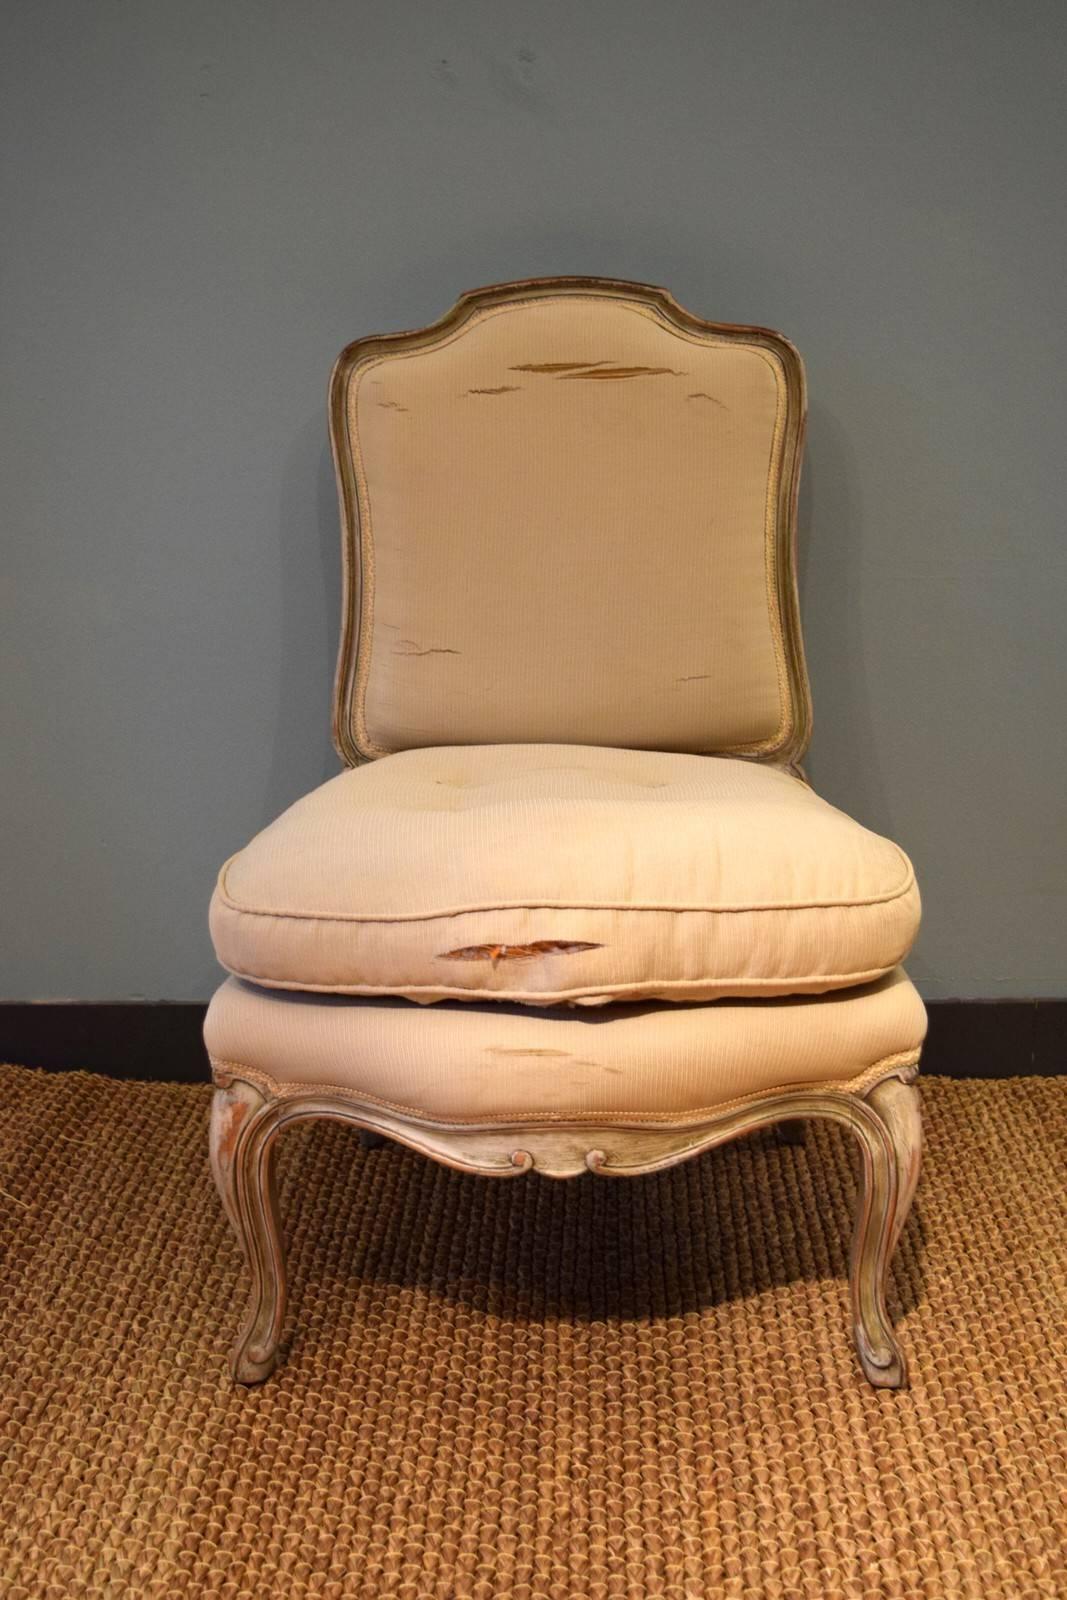 Patinated chair, upholstered in natural silk.
French,
early to mid-18th century.
Louis XV.